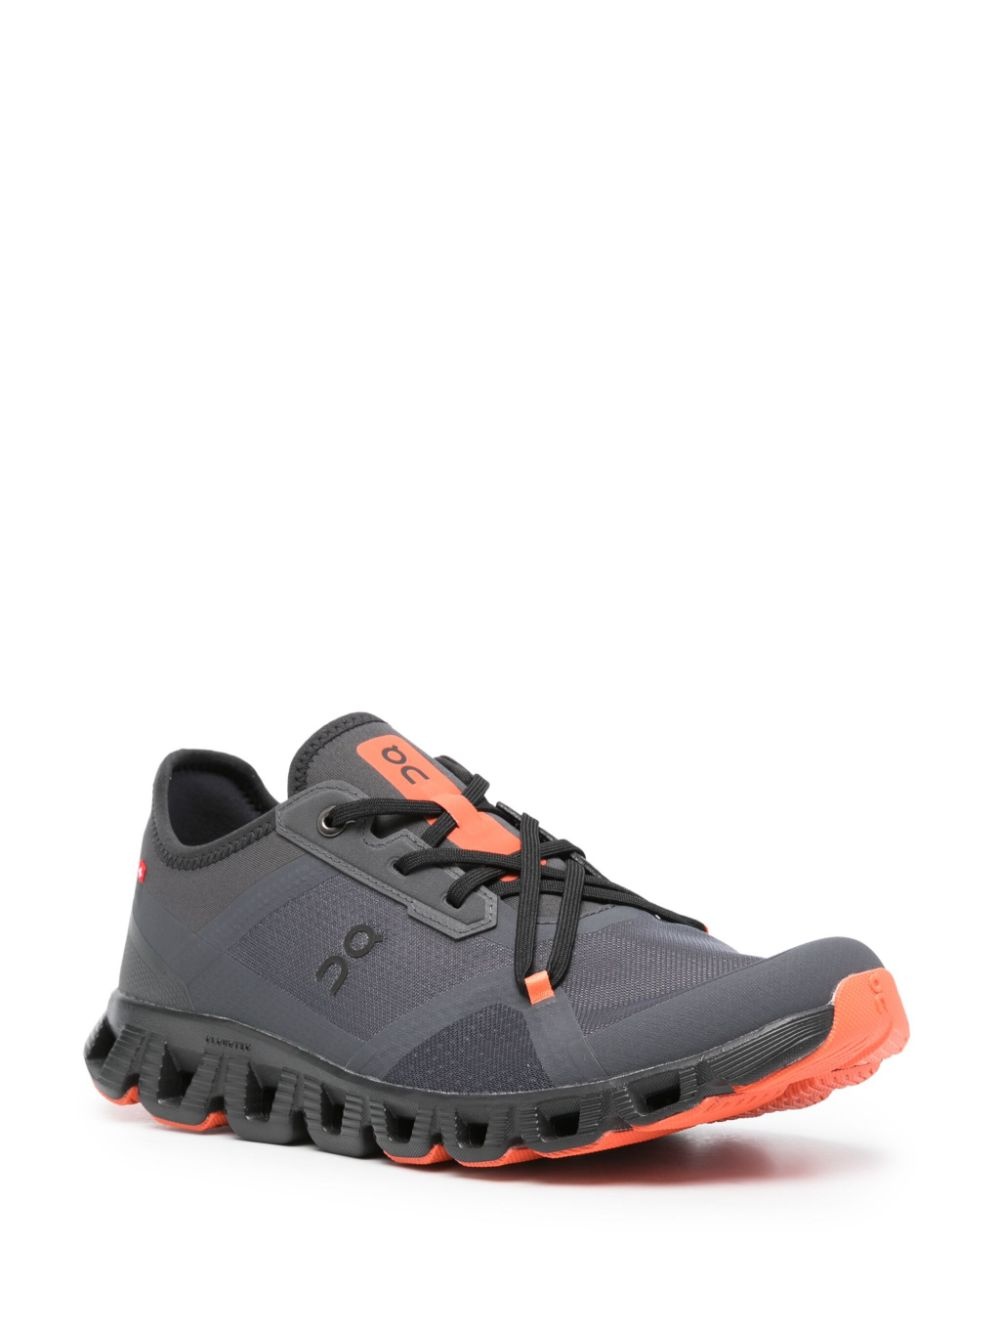 Cloud X 3 AD performance sneakers - 2